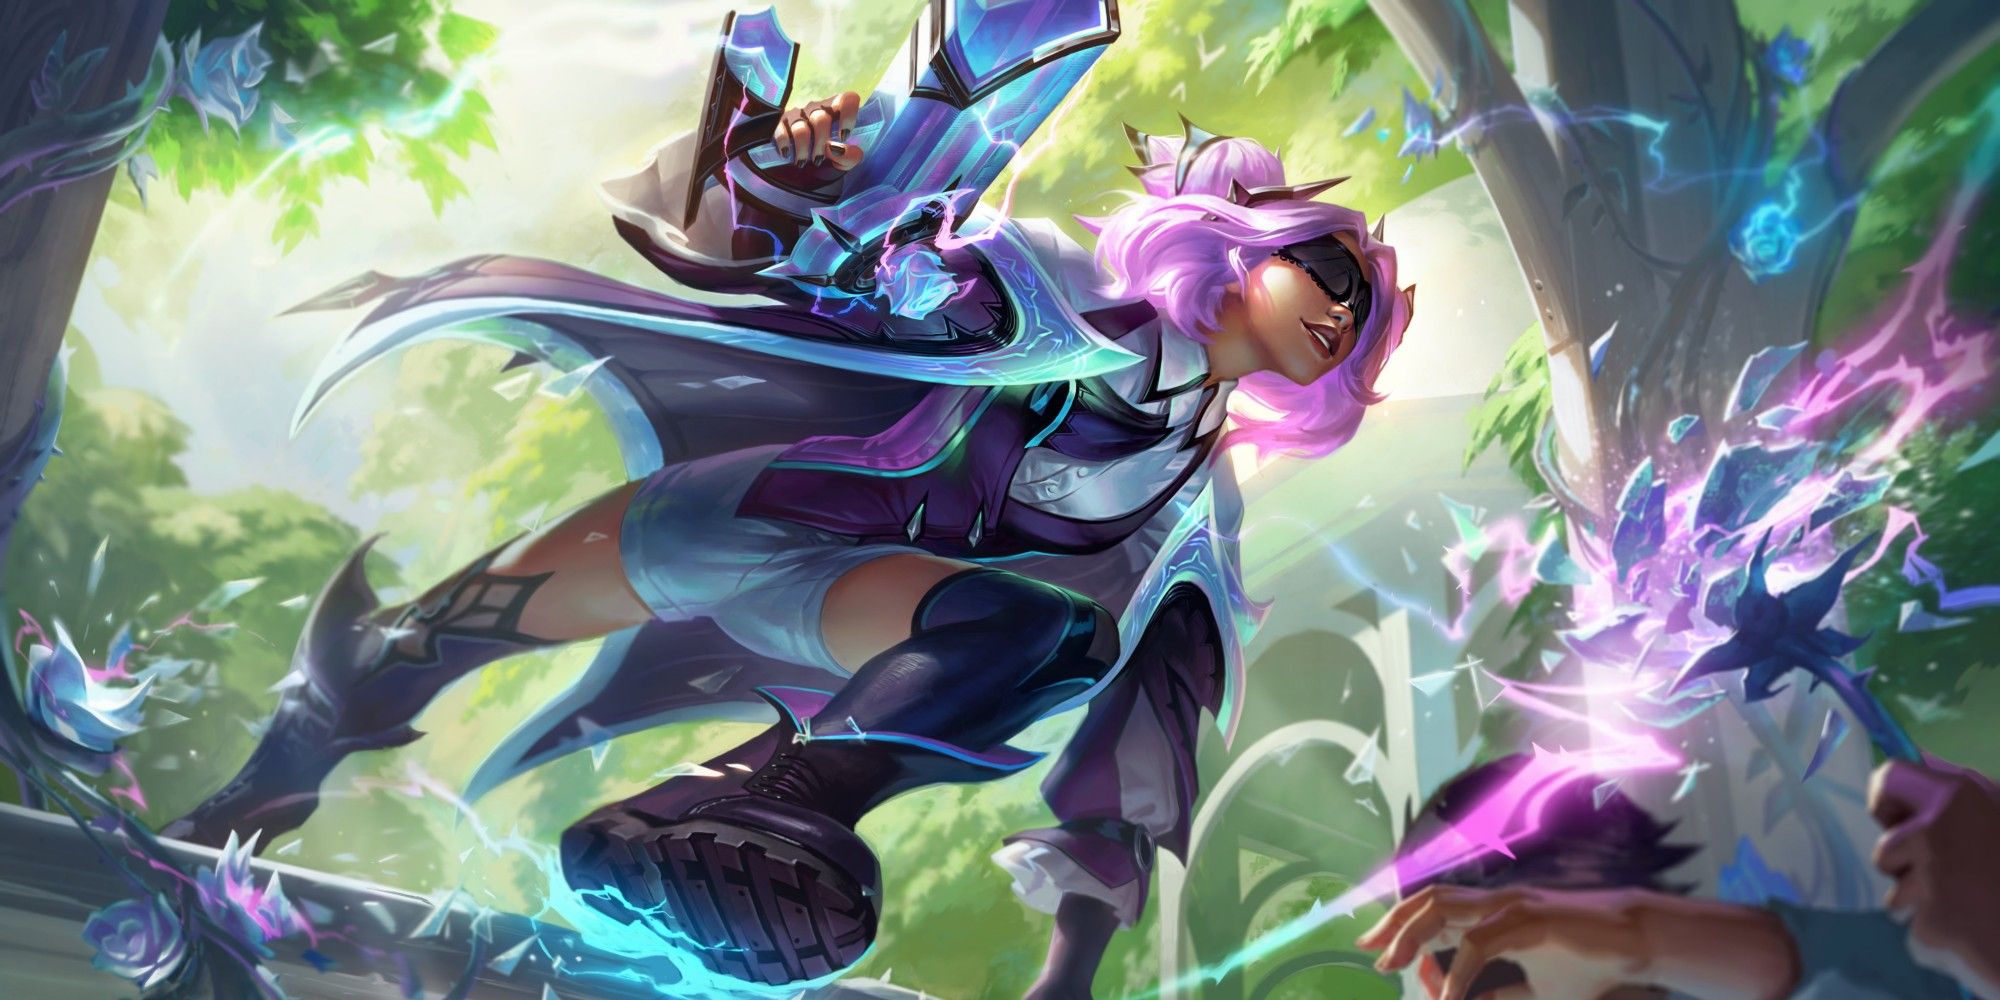 Splash art for Withered Rose Zeri, the new League of Legends champion.